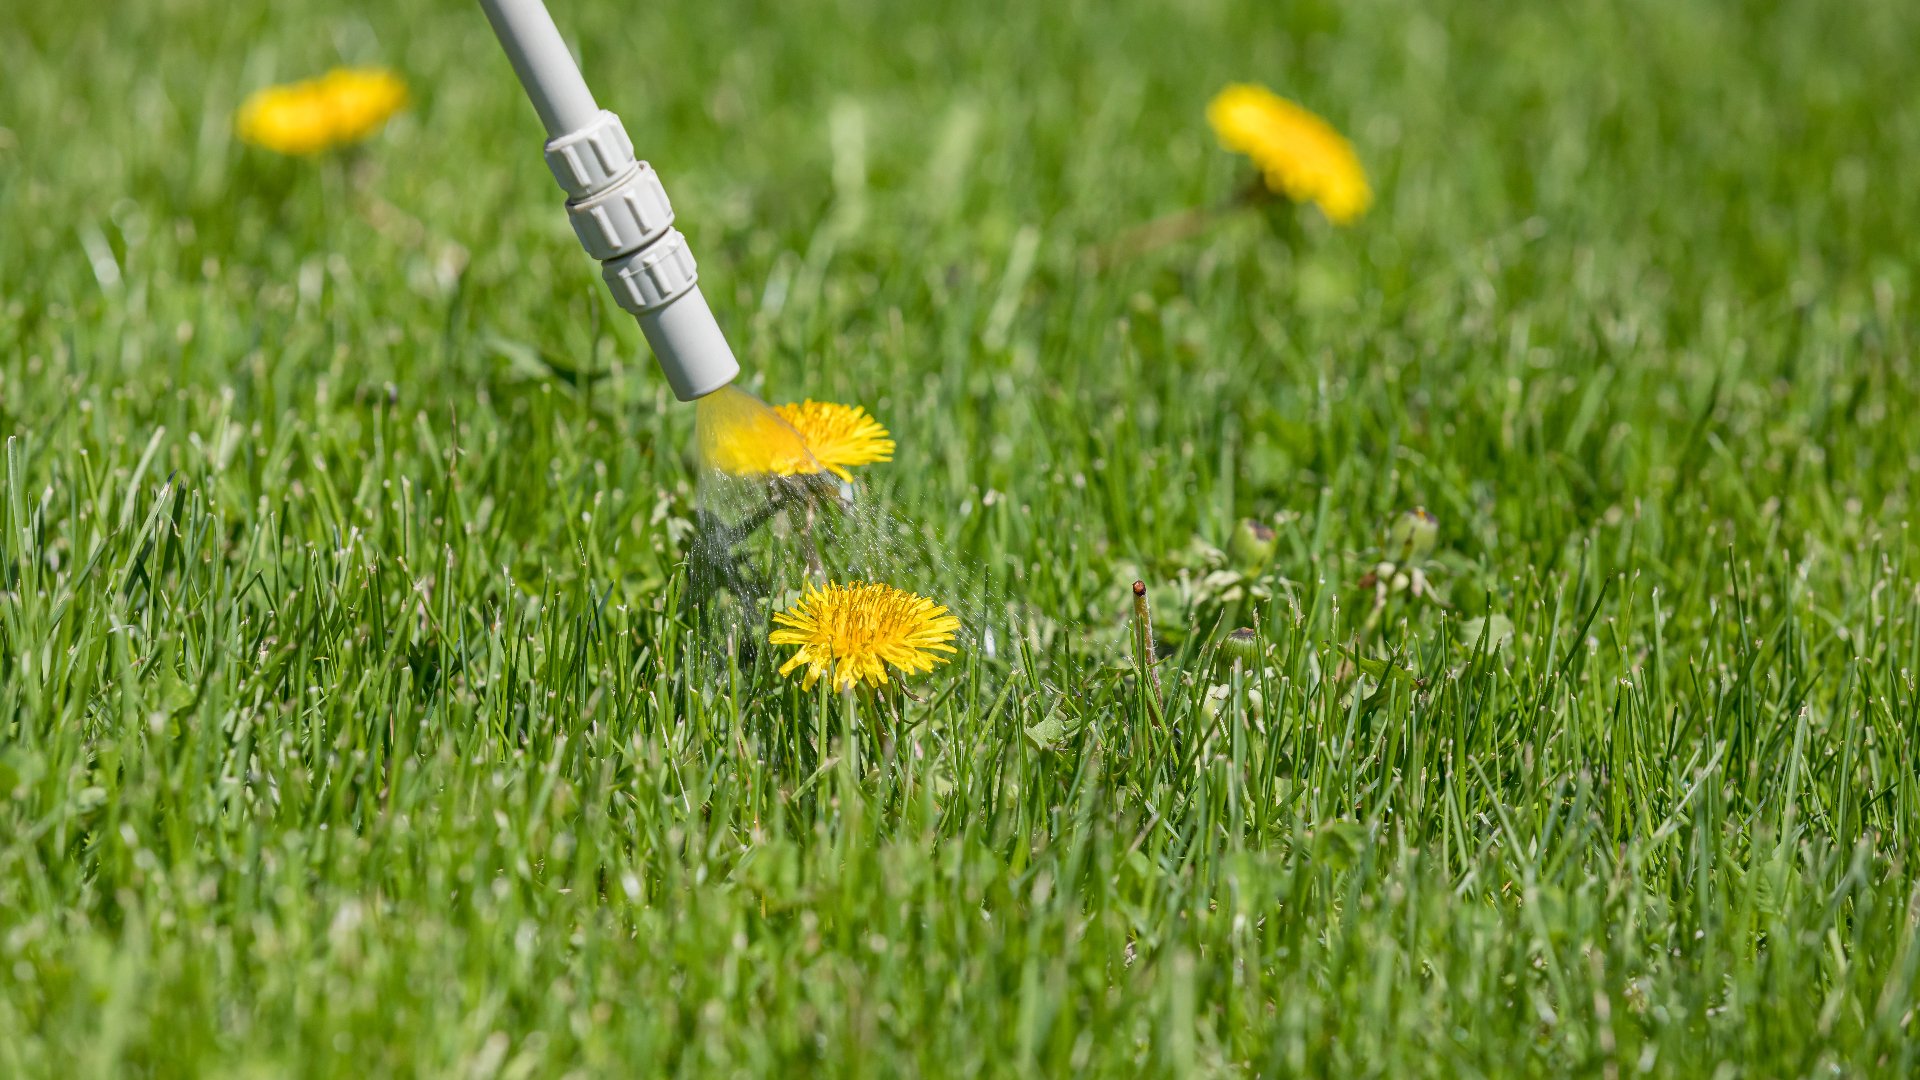 Achieve a Weed-Free Lawn by Using Both Pre- & Post-Emergent Weed Control